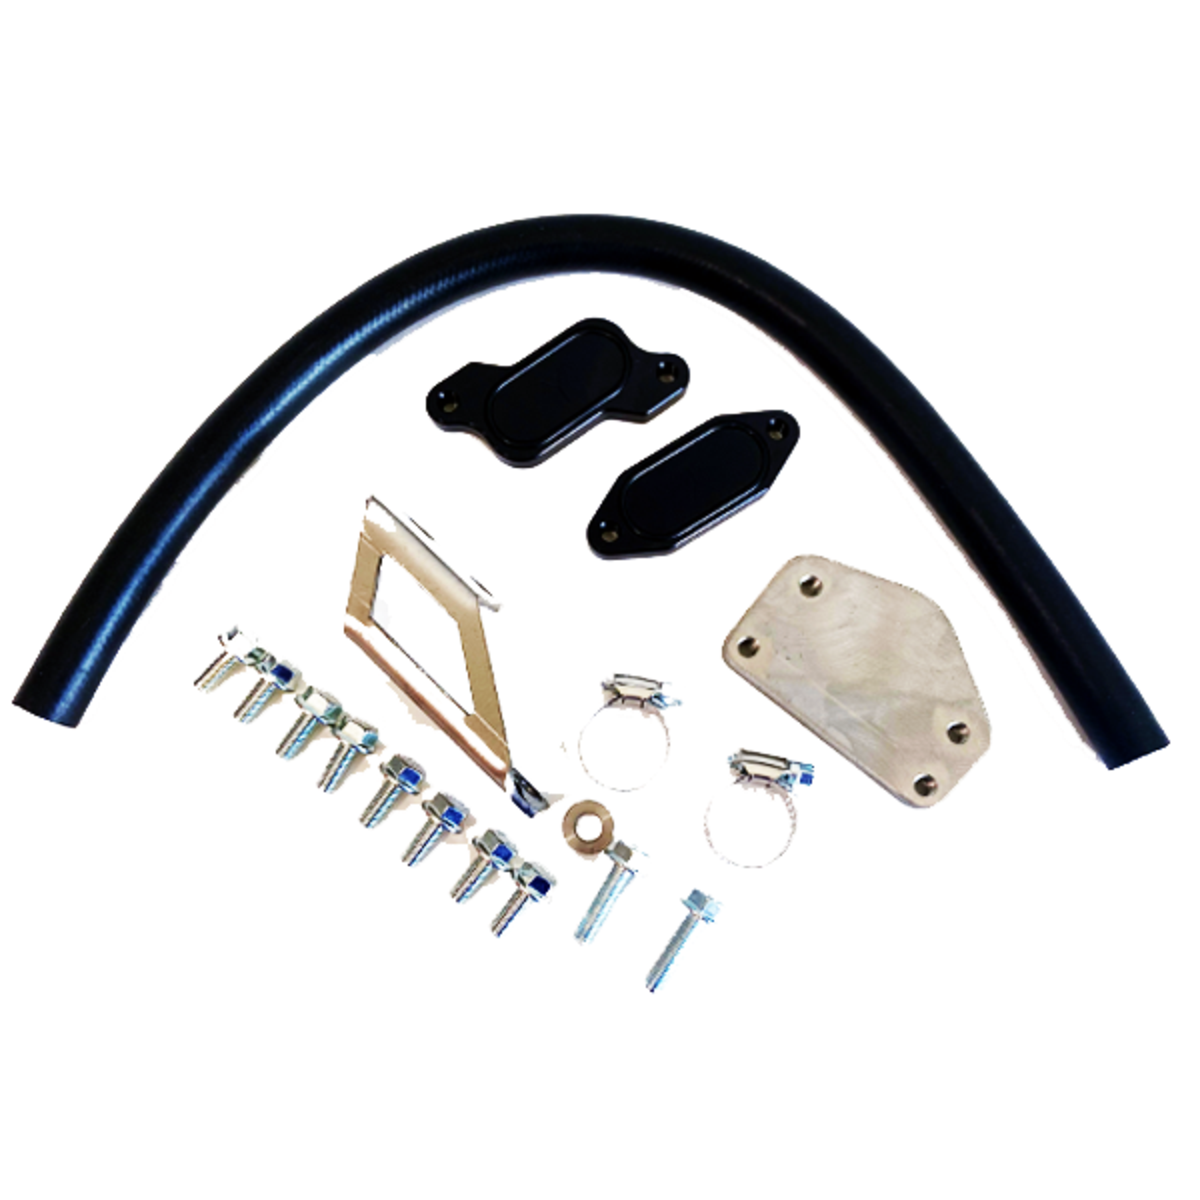 420016-C 2004.5-2005 Duramax 6.6L LLY Cooler Upgrade Kit Hell On Wheels Canada